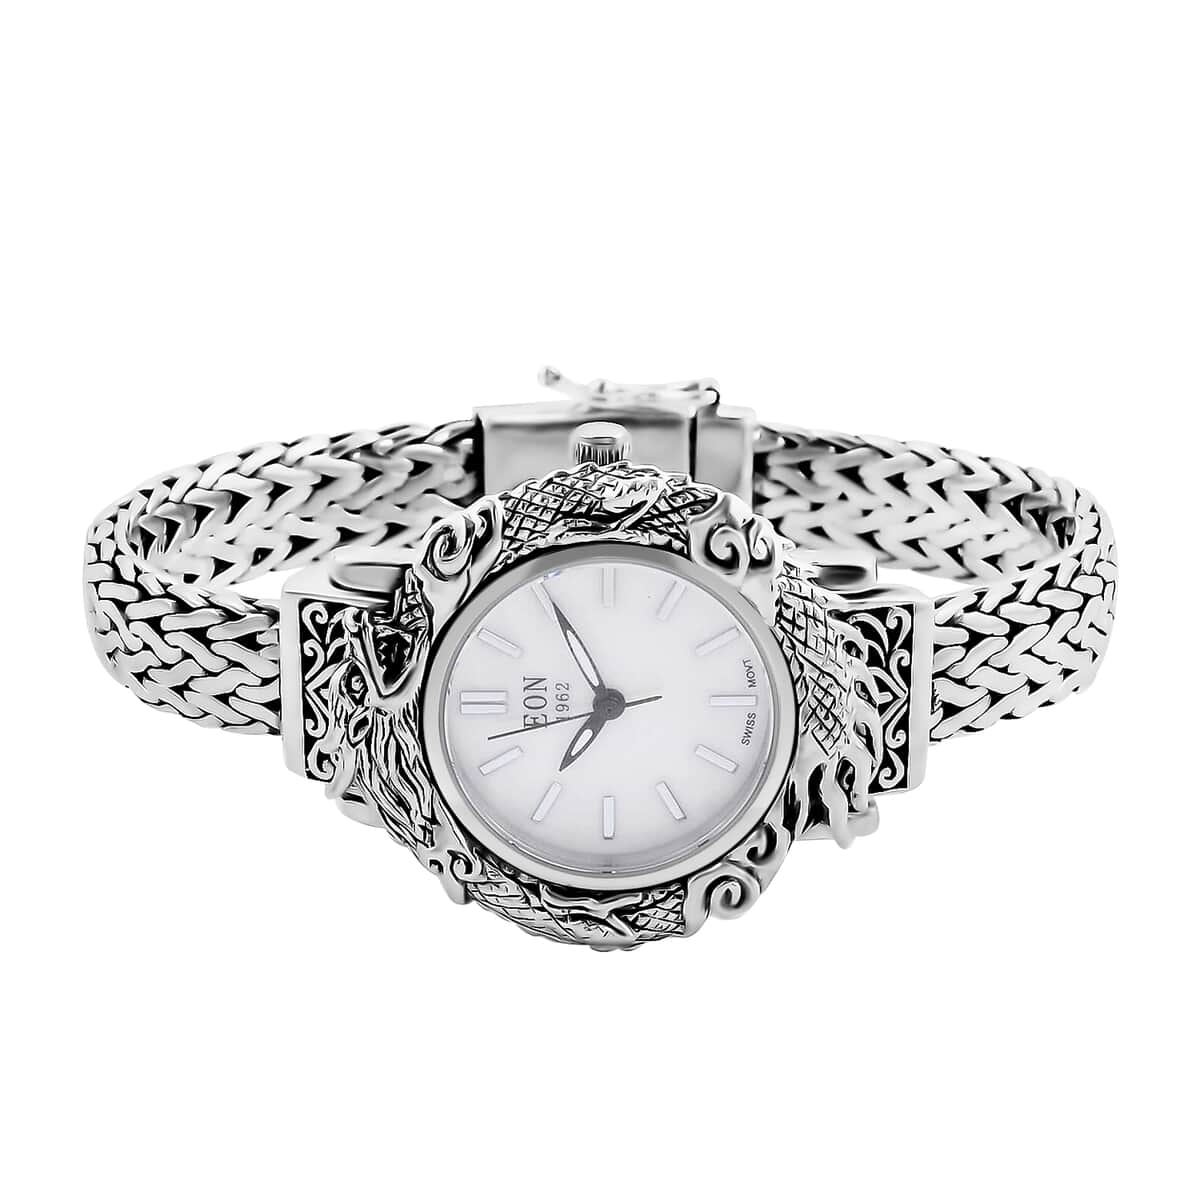 Bali Legacy Eon 1962 Swiss Movement MOP Dial Dragon Case Bracelet Watch in Sterling Silver (8.00 in), Vintage Casual Bracelet Watch, Best Everyday Luxury Minimal Women's Watch, Analogue Watches image number 3